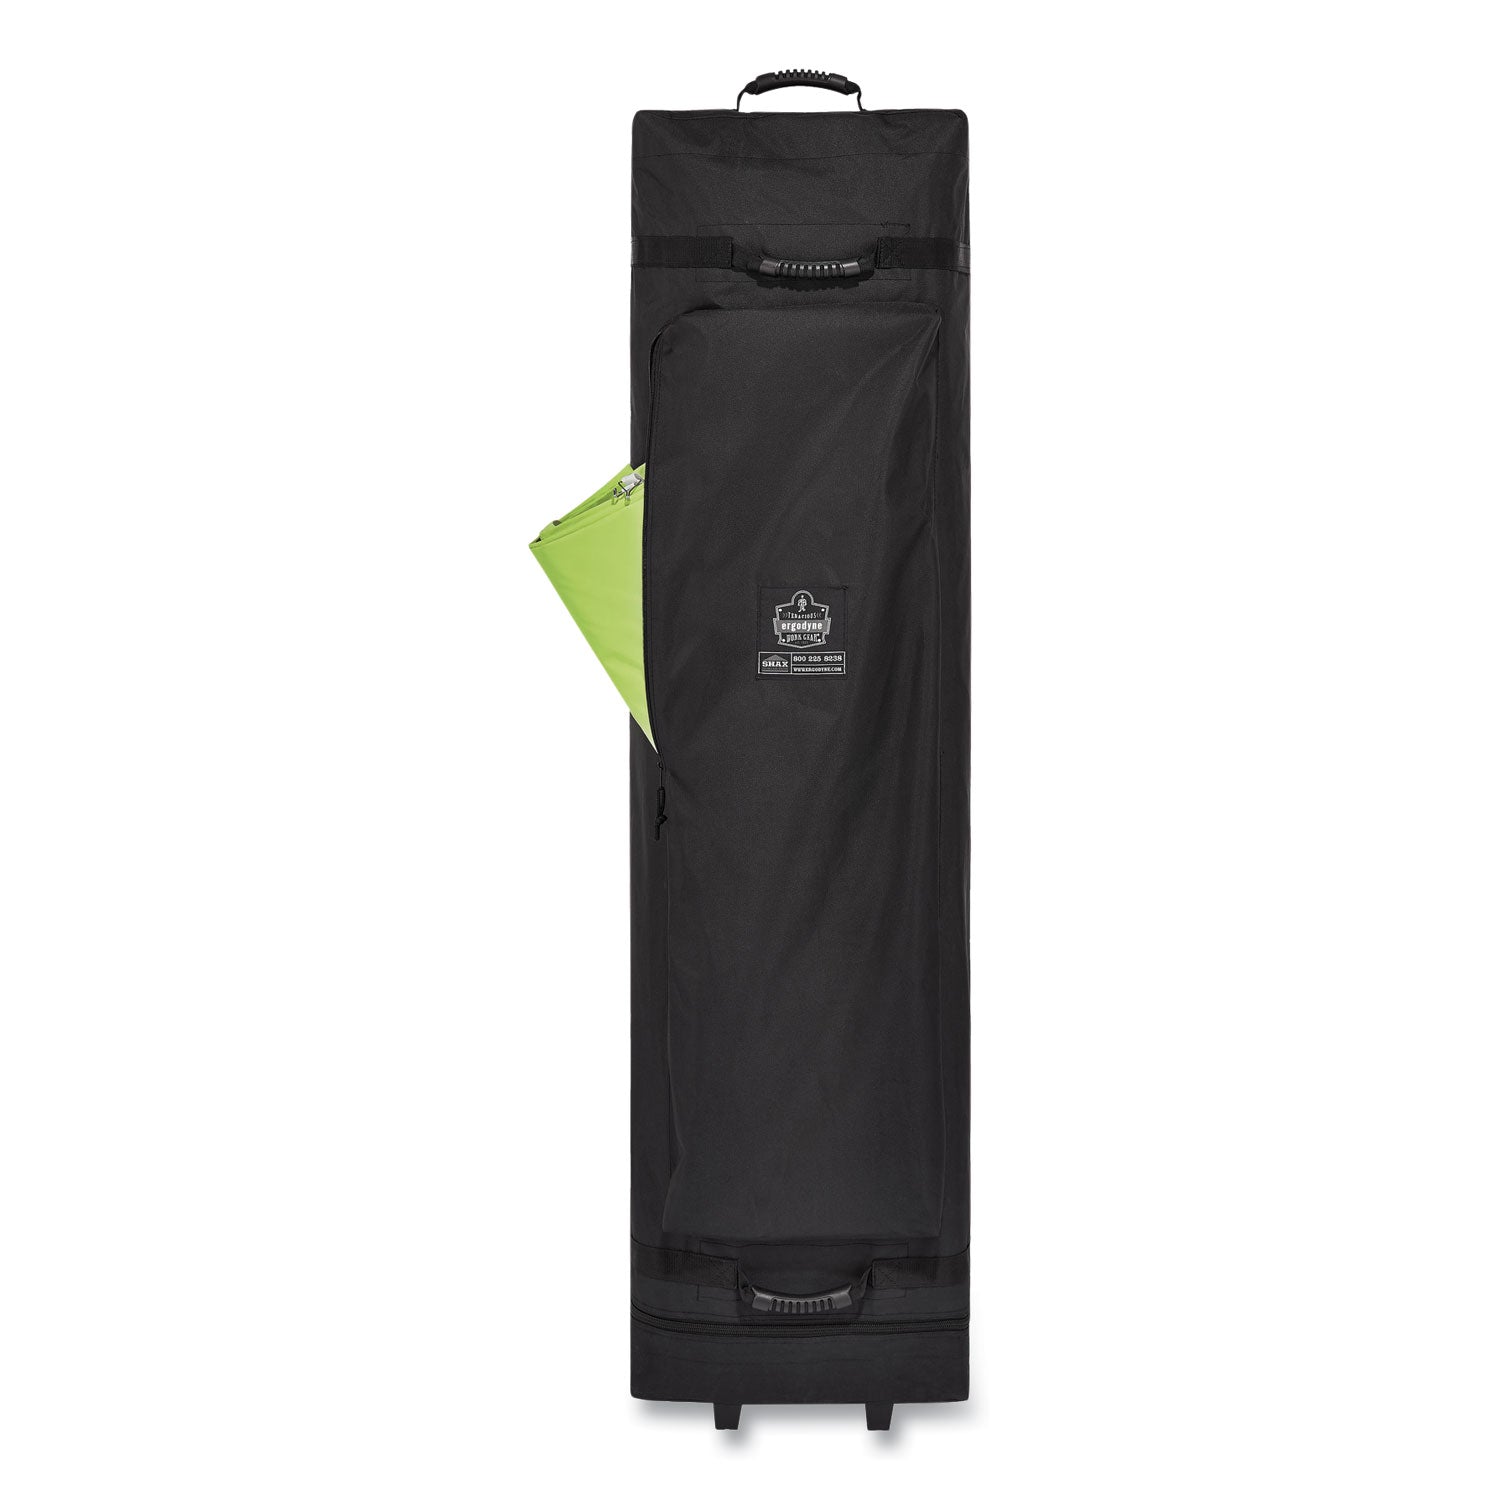 shax-6015b-replacement-tent-storage-bag-for-6015-polyester-black-ships-in-1-3-business-days_ego12917 - 3